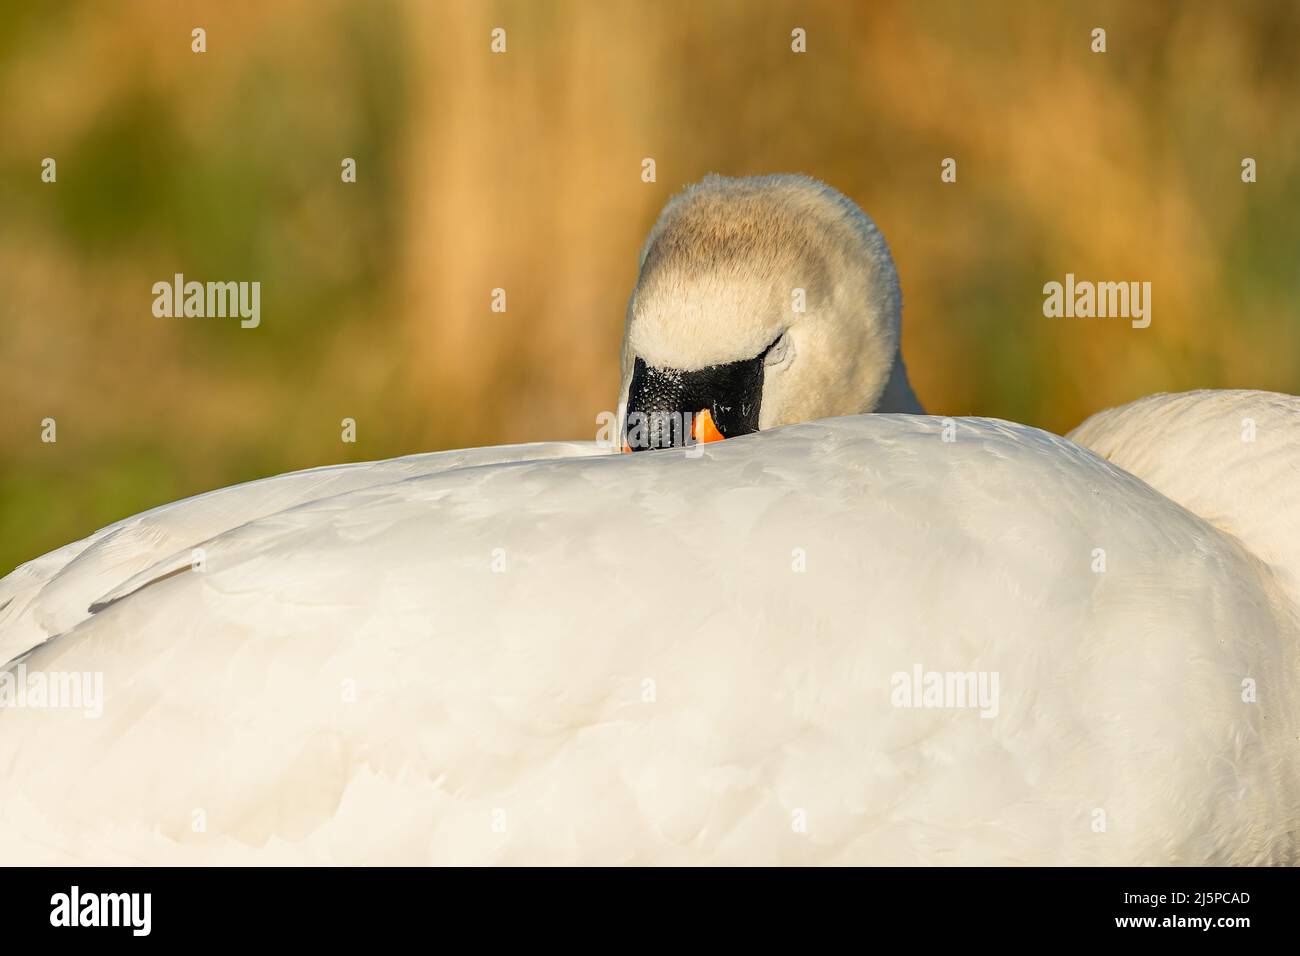 Close up image of a white mute swan sleeping with its beak hiding in feathers on the back. A sunny spring day. Blurry yellow and green background. Stock Photo